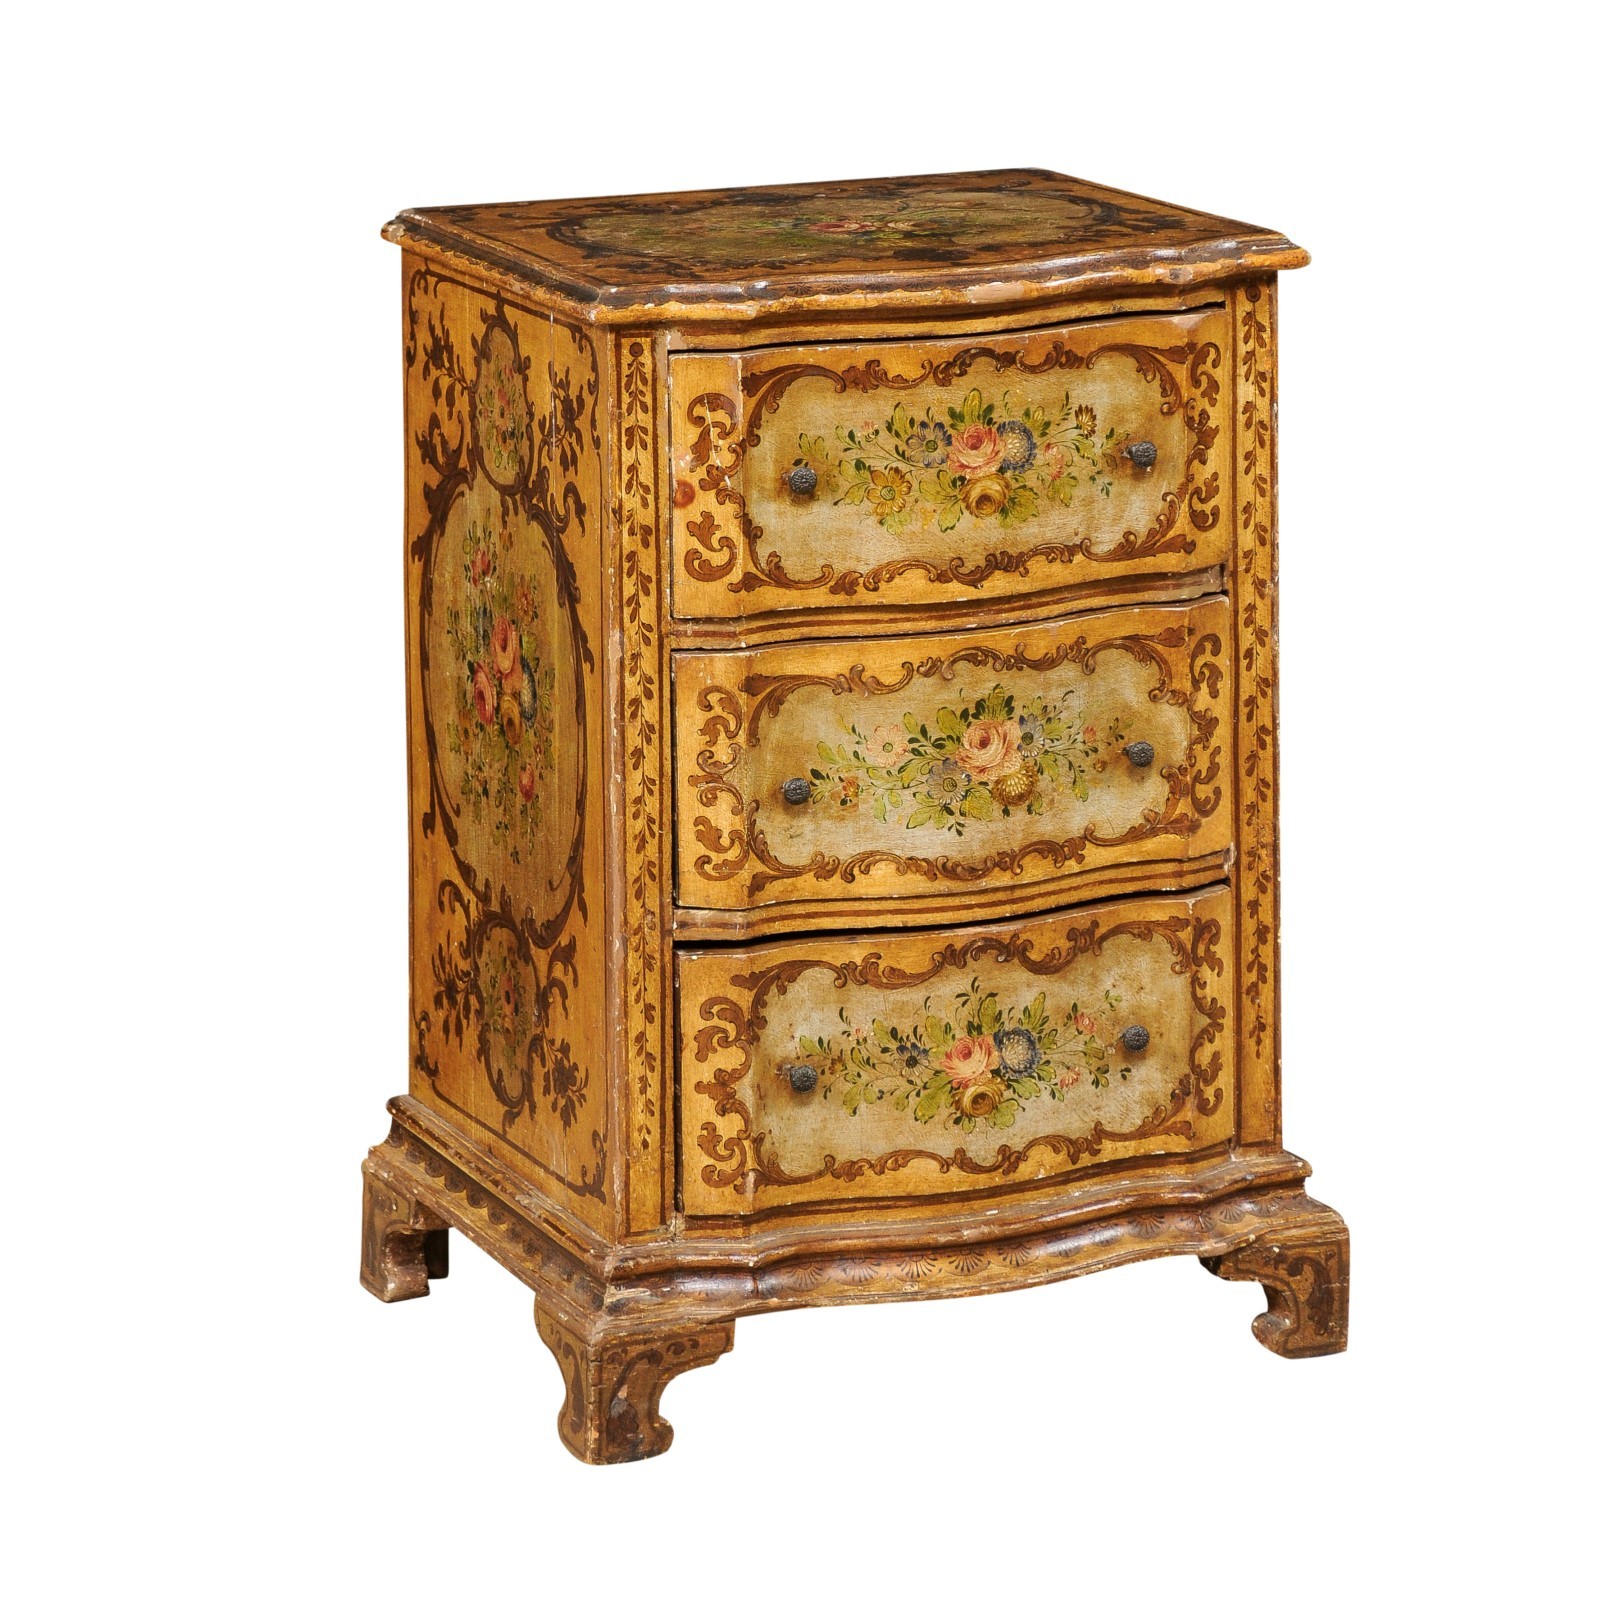 Italian Floral-Painted Petite Chest, 19th c